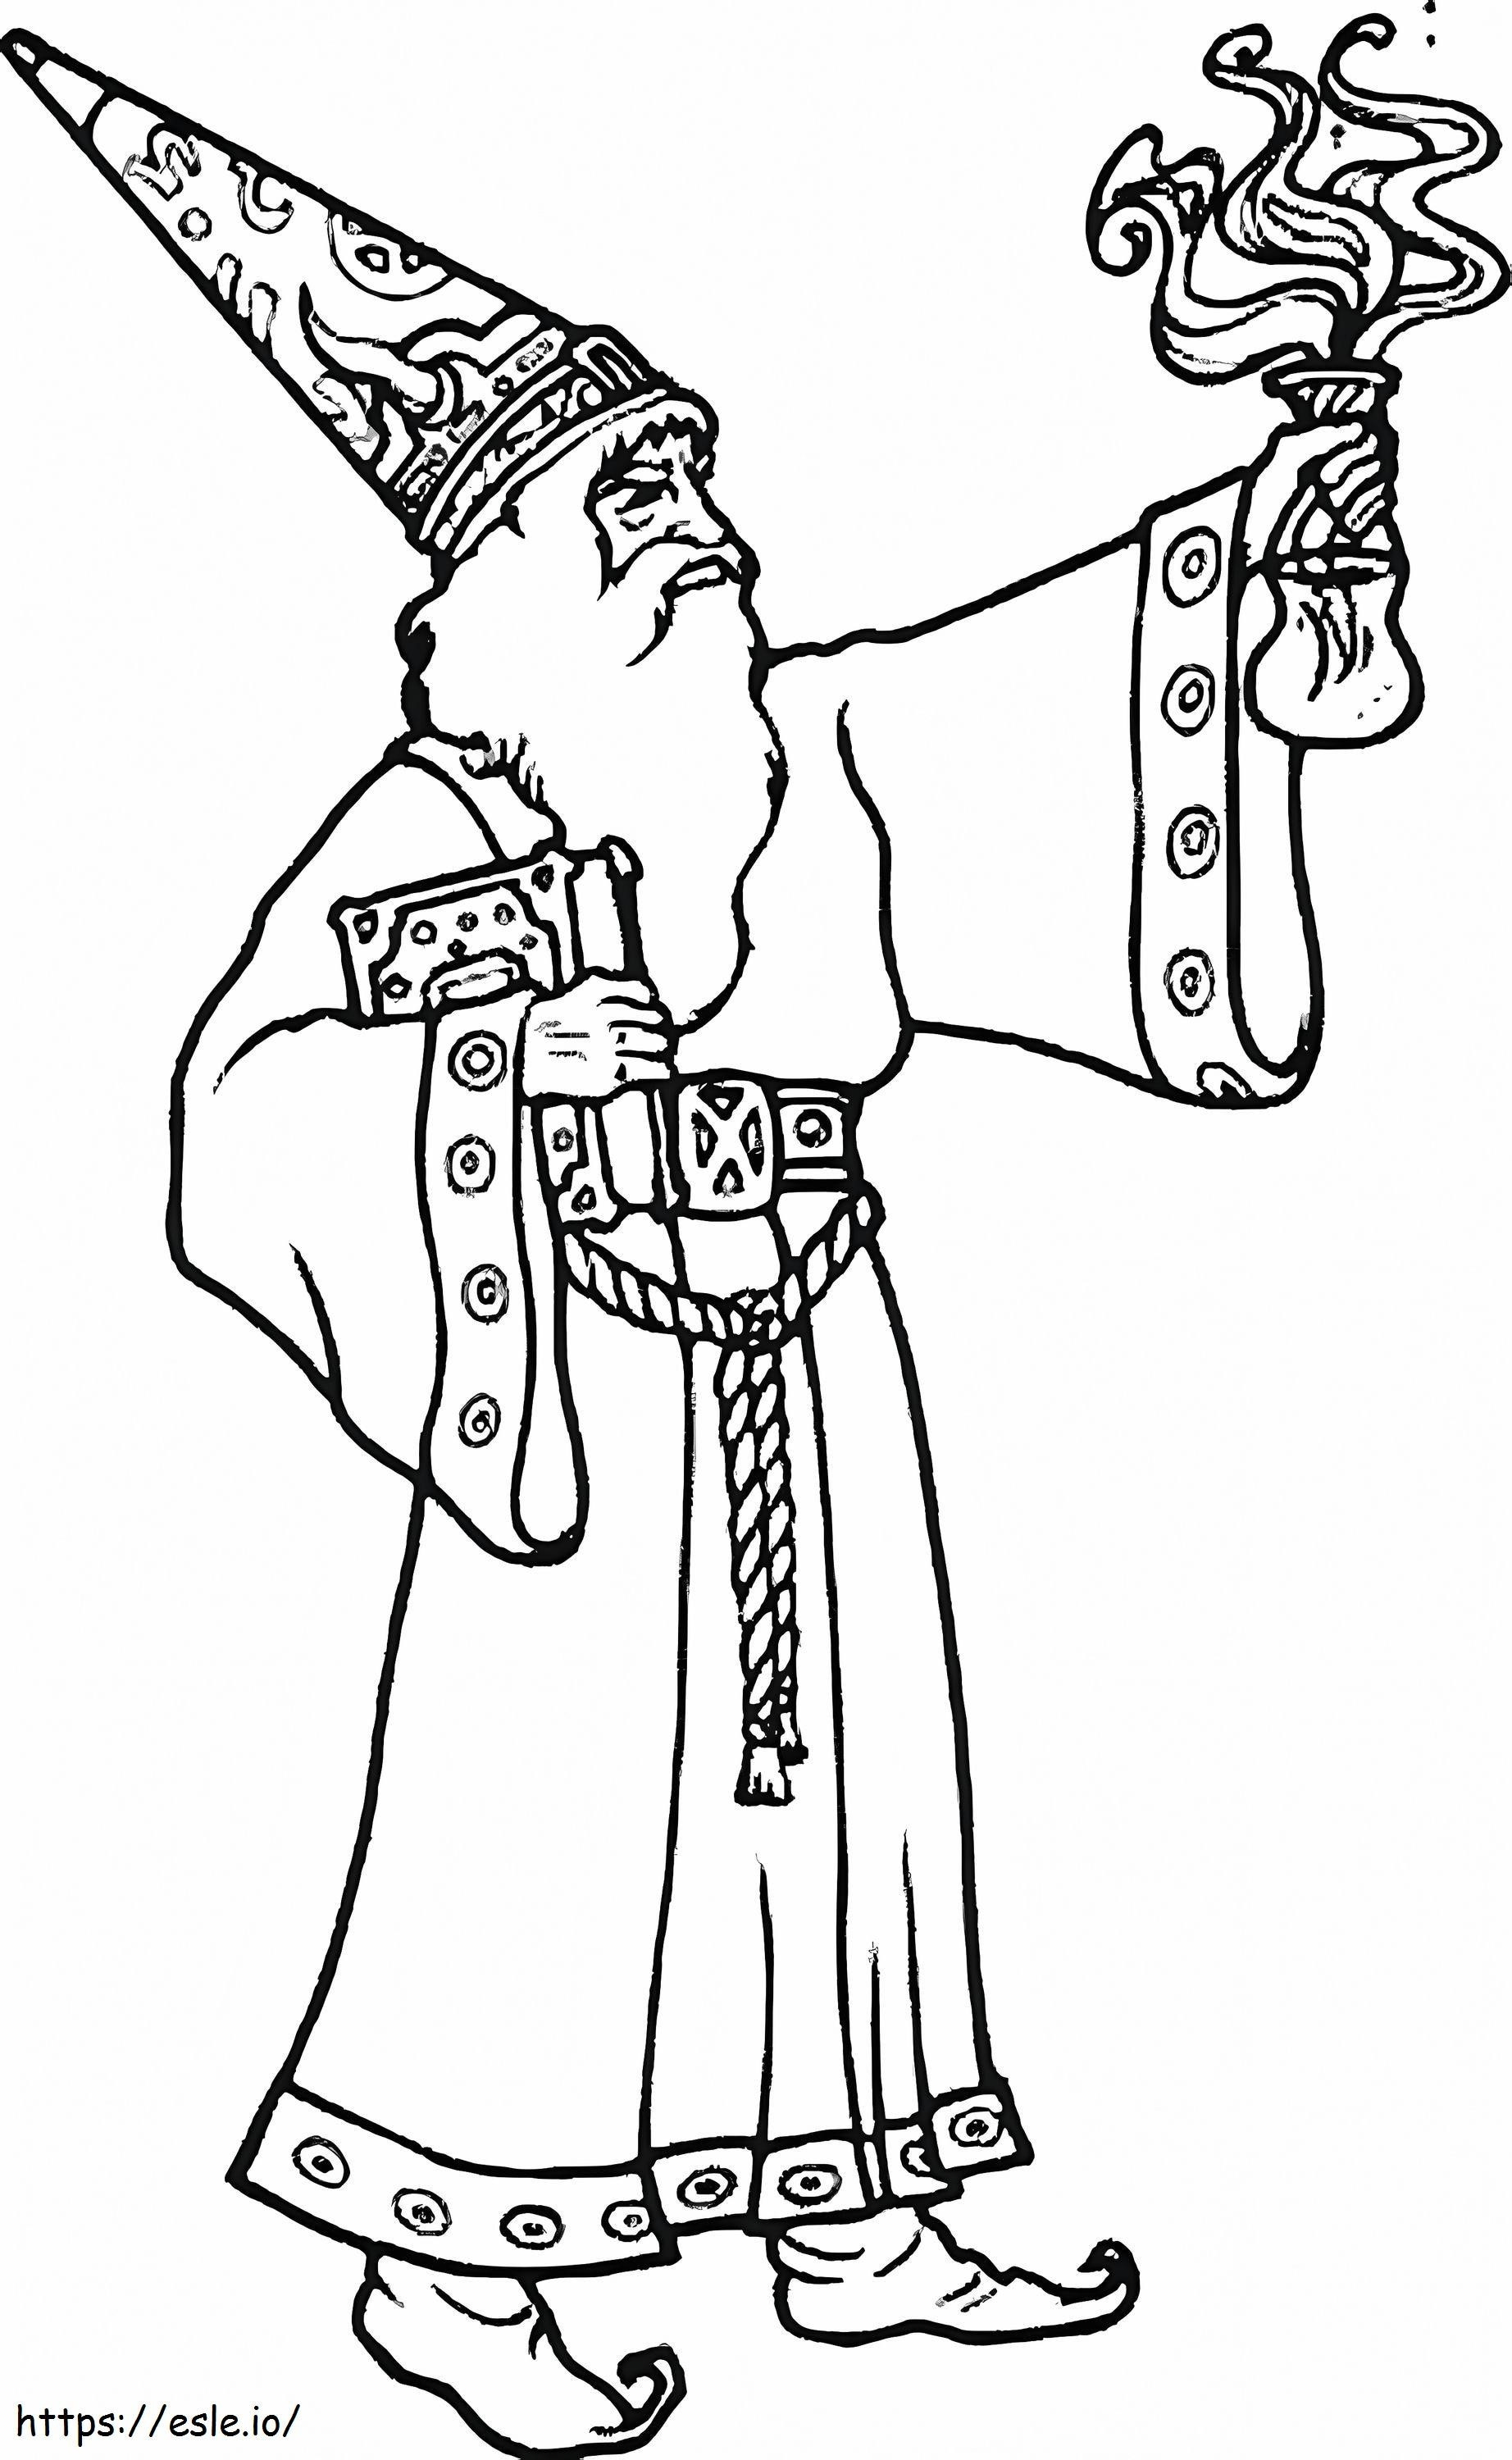 Magic Wizard 5 coloring page